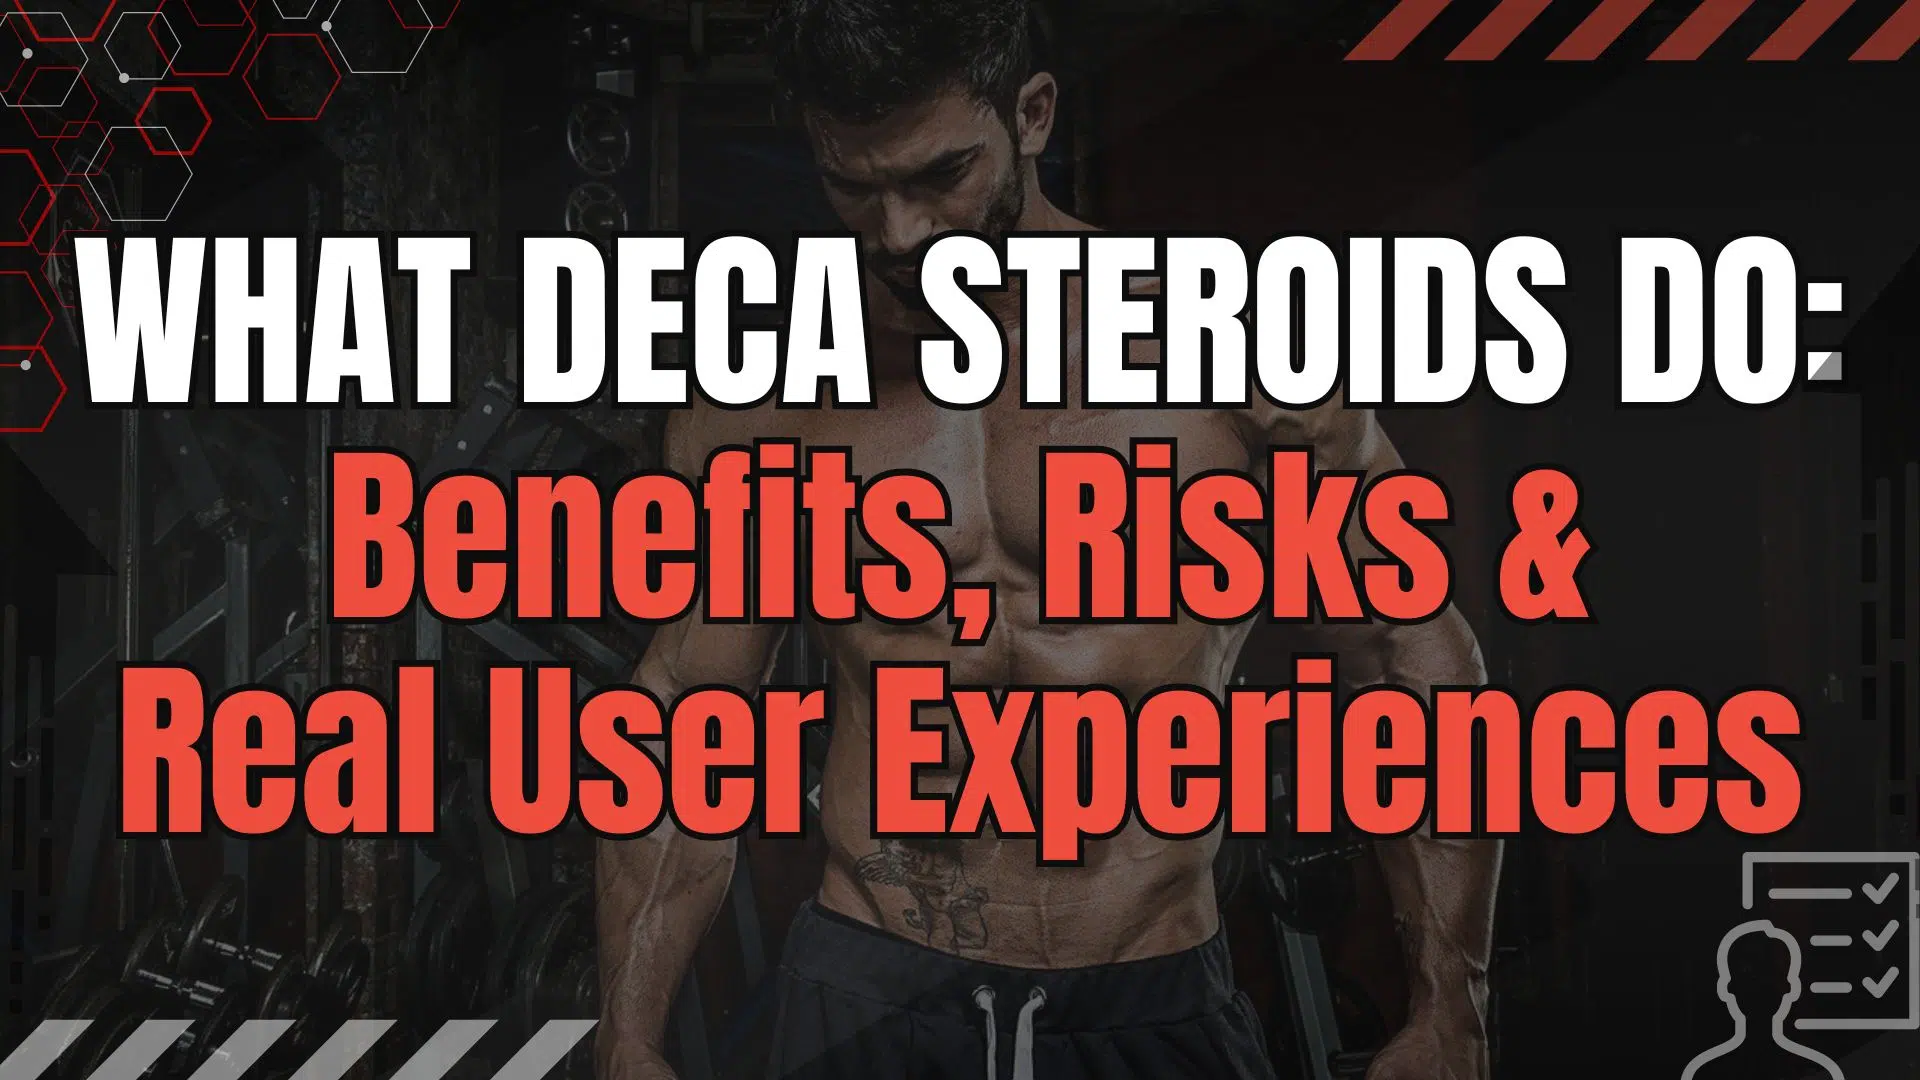 What Deca Steroids Do: Benefits, Risks & Real User Experiences